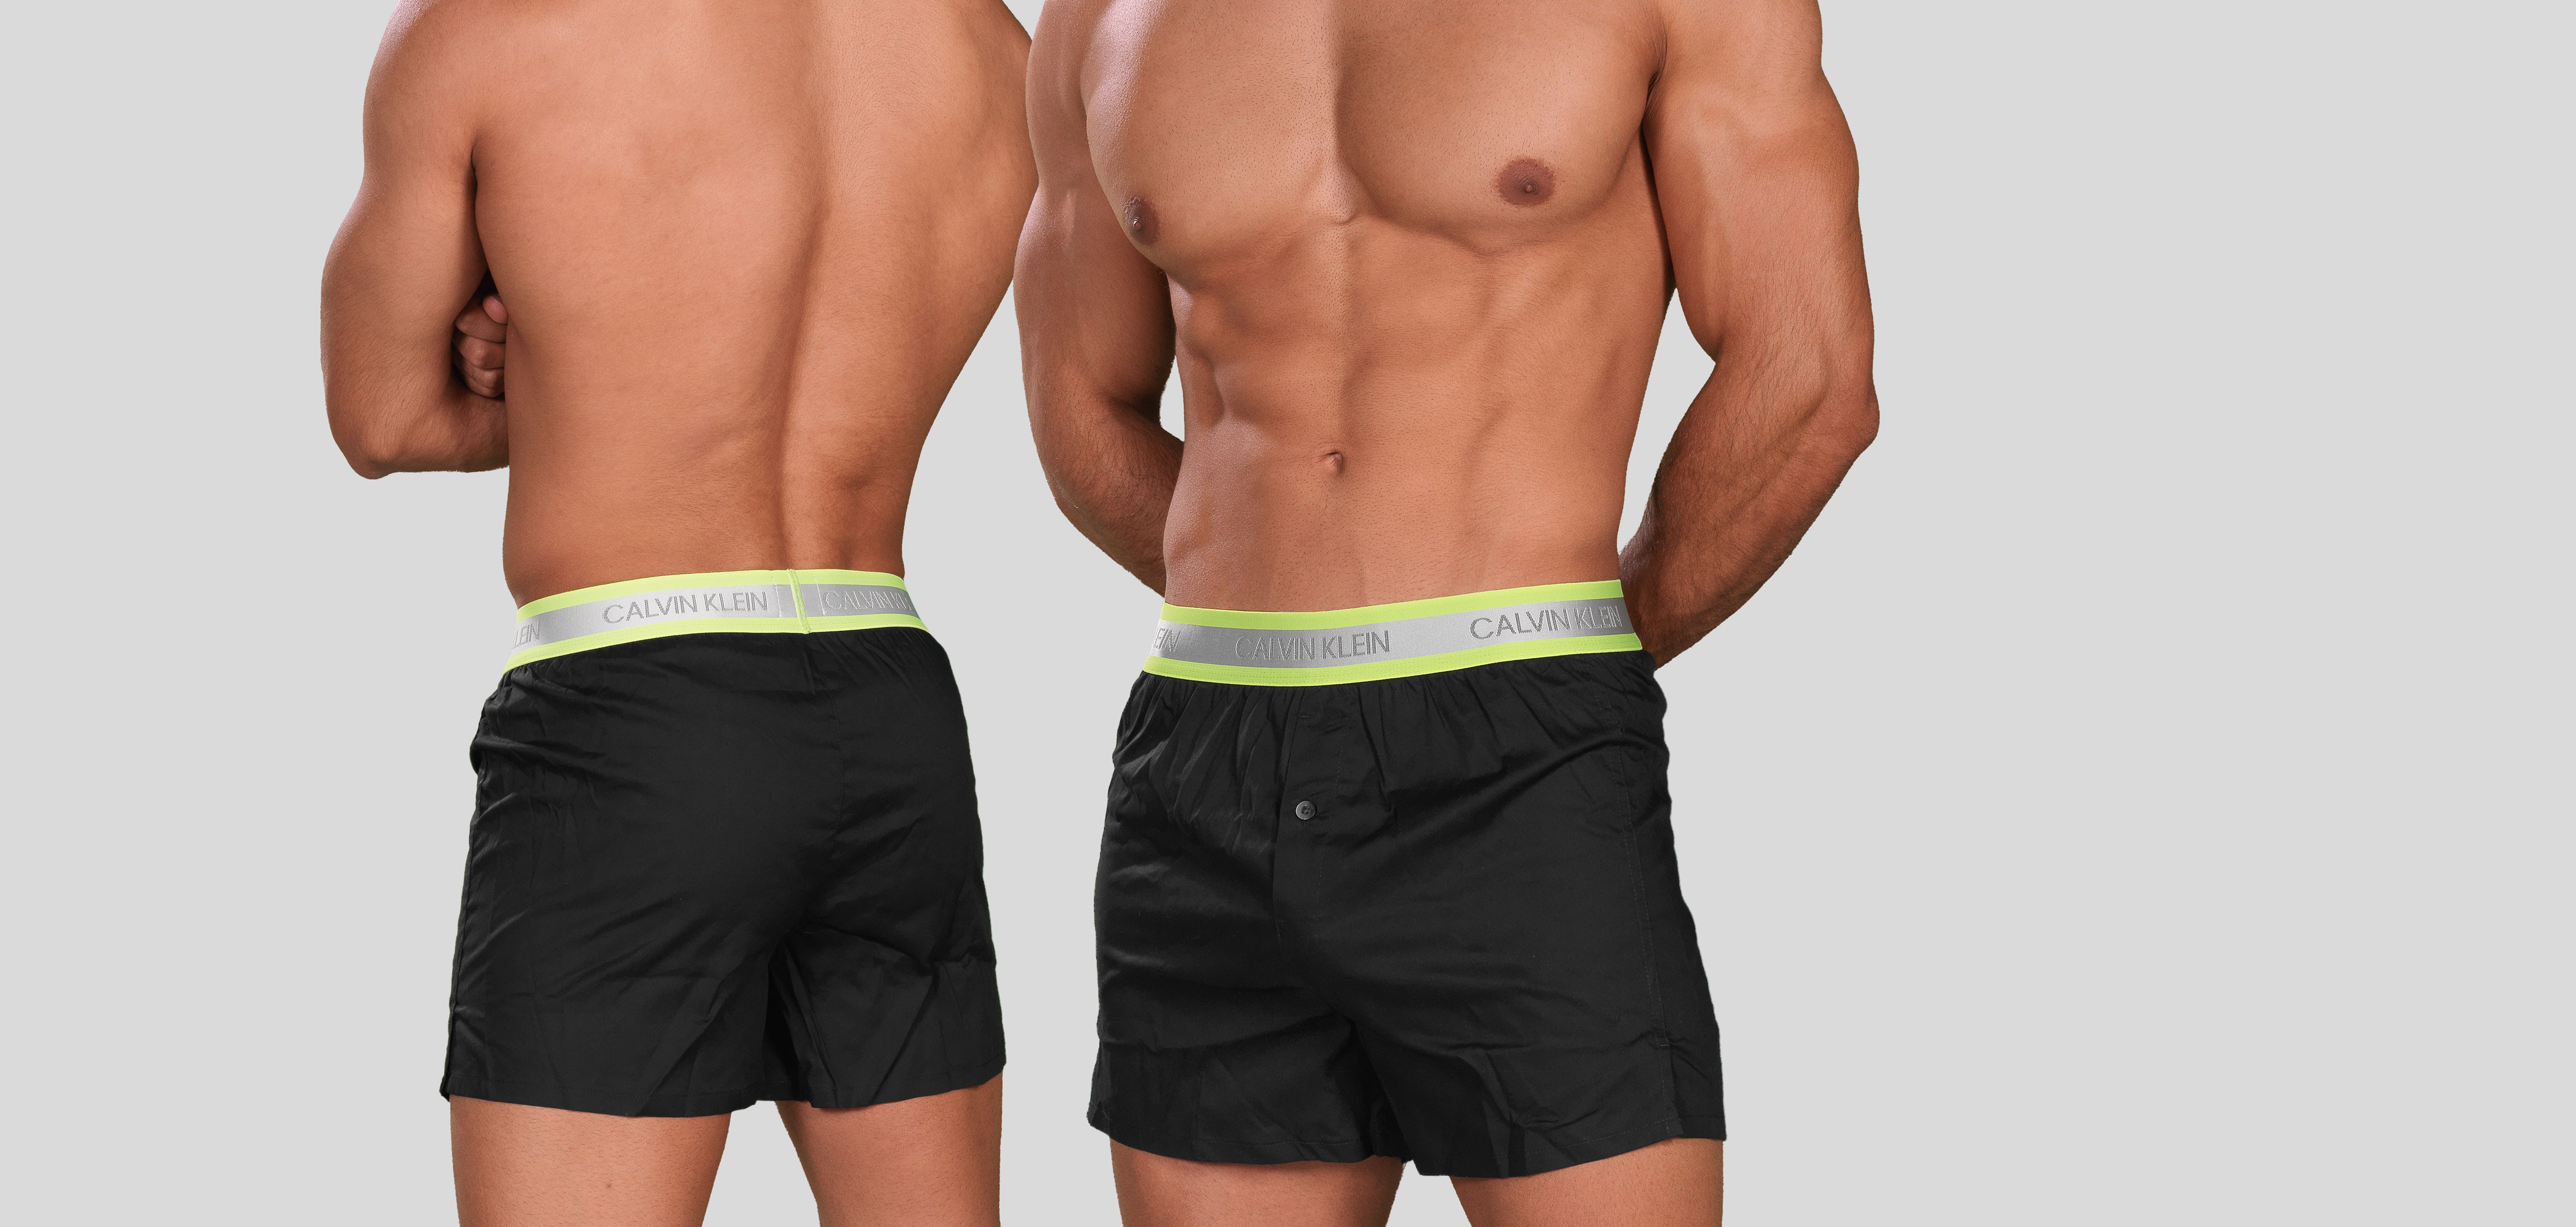 Calvin Klein Limited Edition Boxershort NB2097A, color Nee